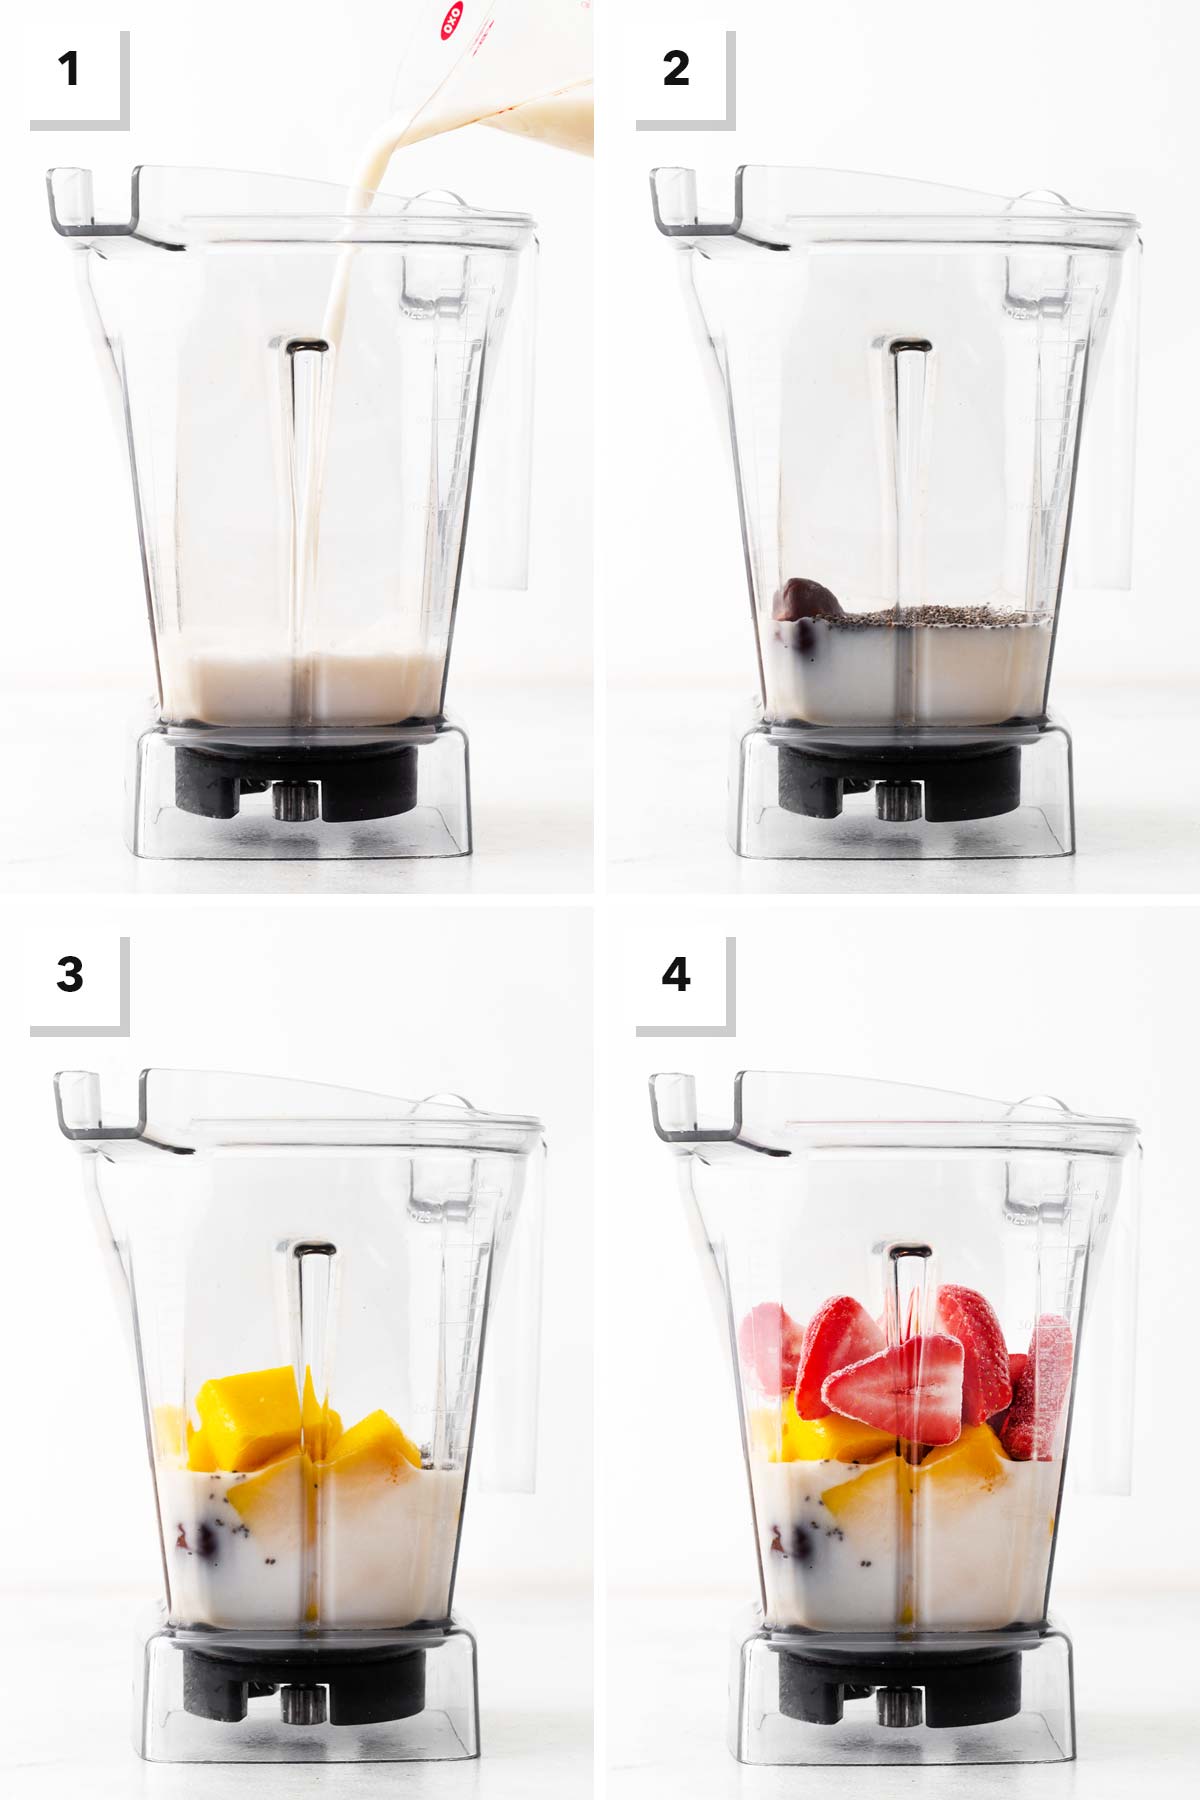 Steps for making a strawberry mango smoothie.